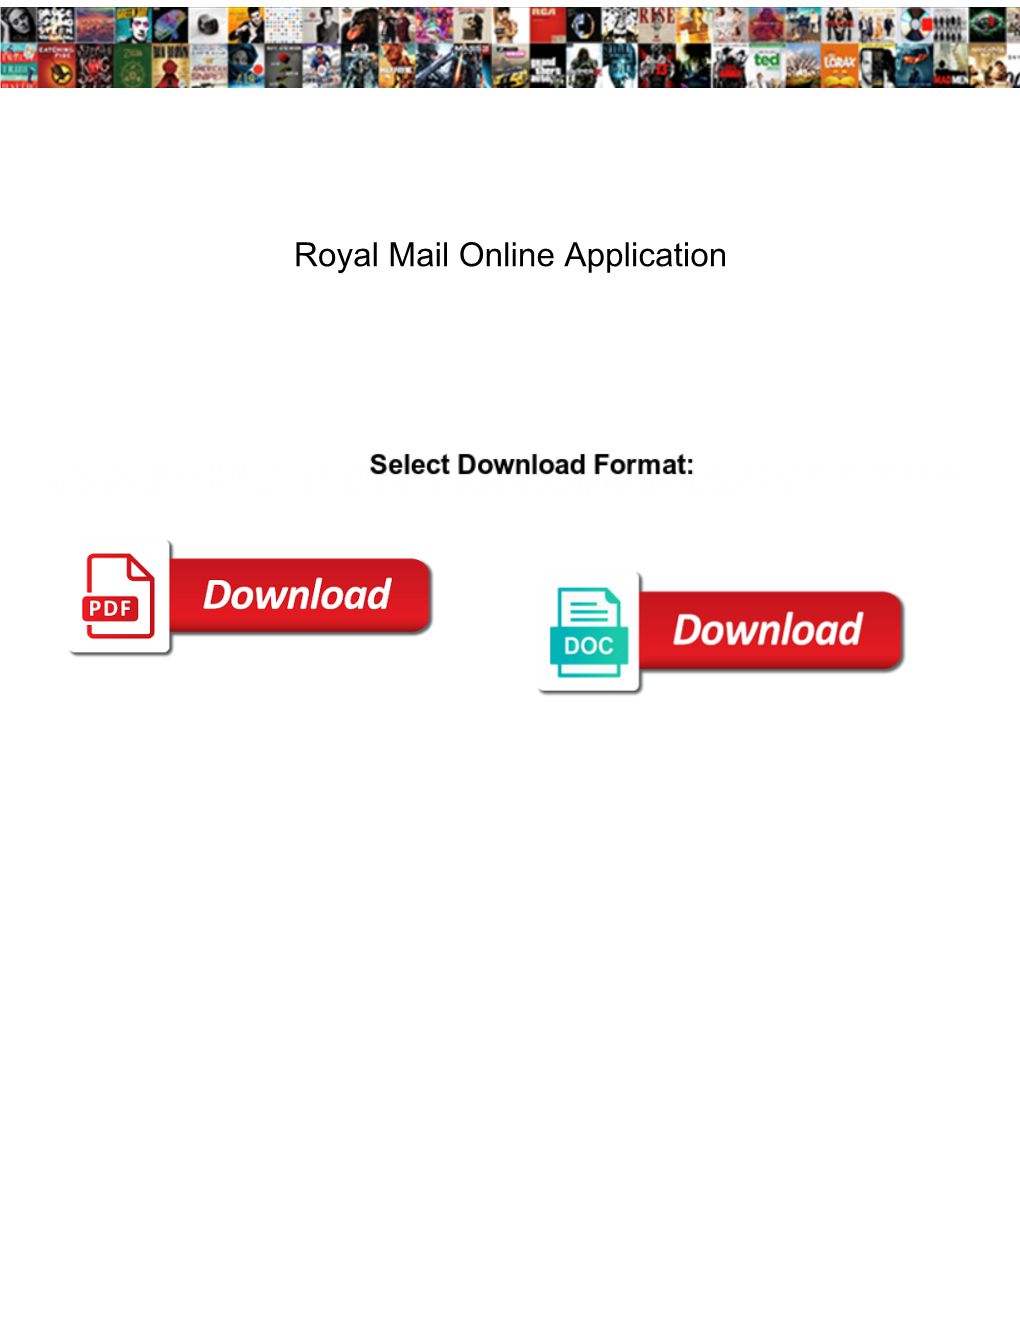 Royal Mail Online Application